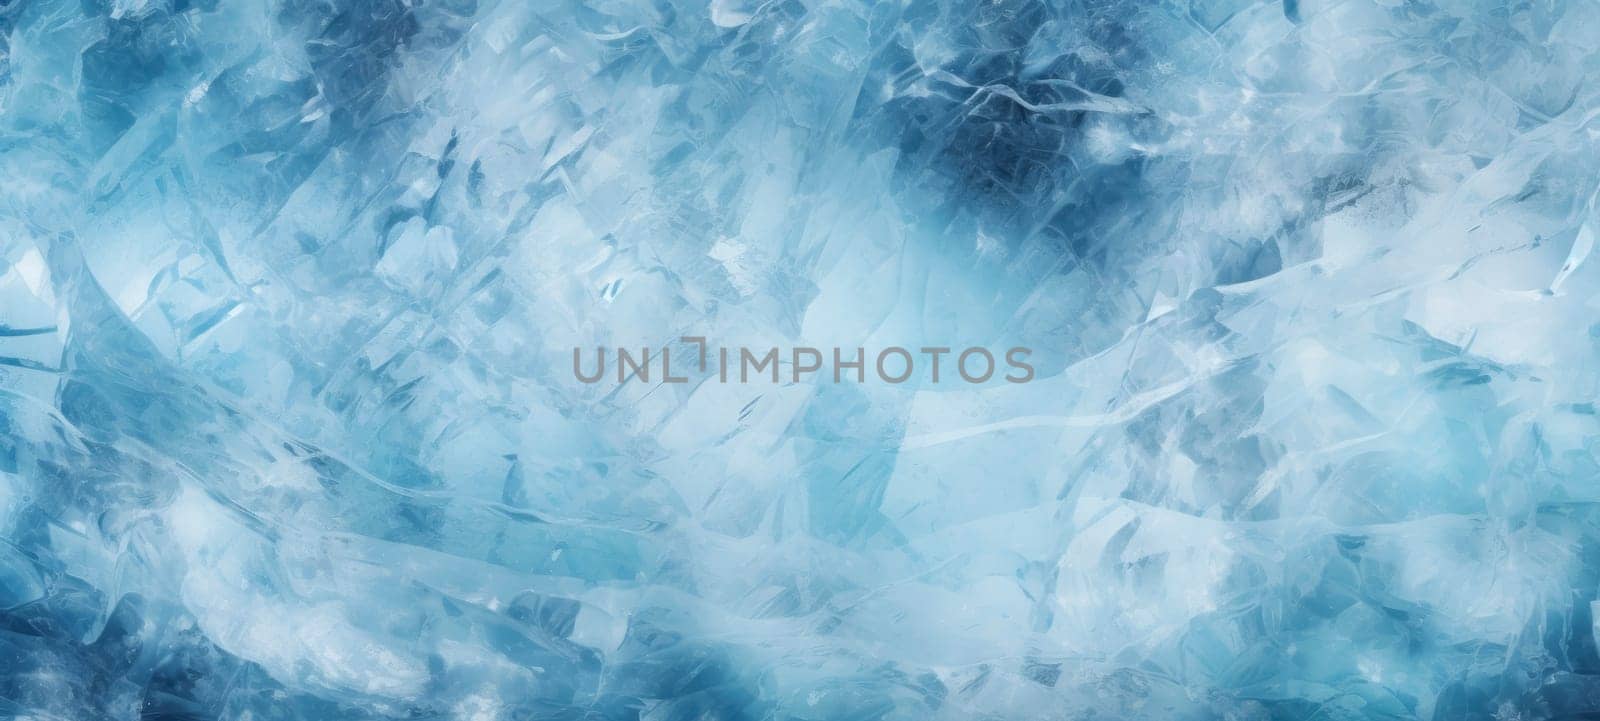 Close-up of a beautiful abstract ice texture with intricate patterns in varying shades of blue, perfect as a cold-themed background.